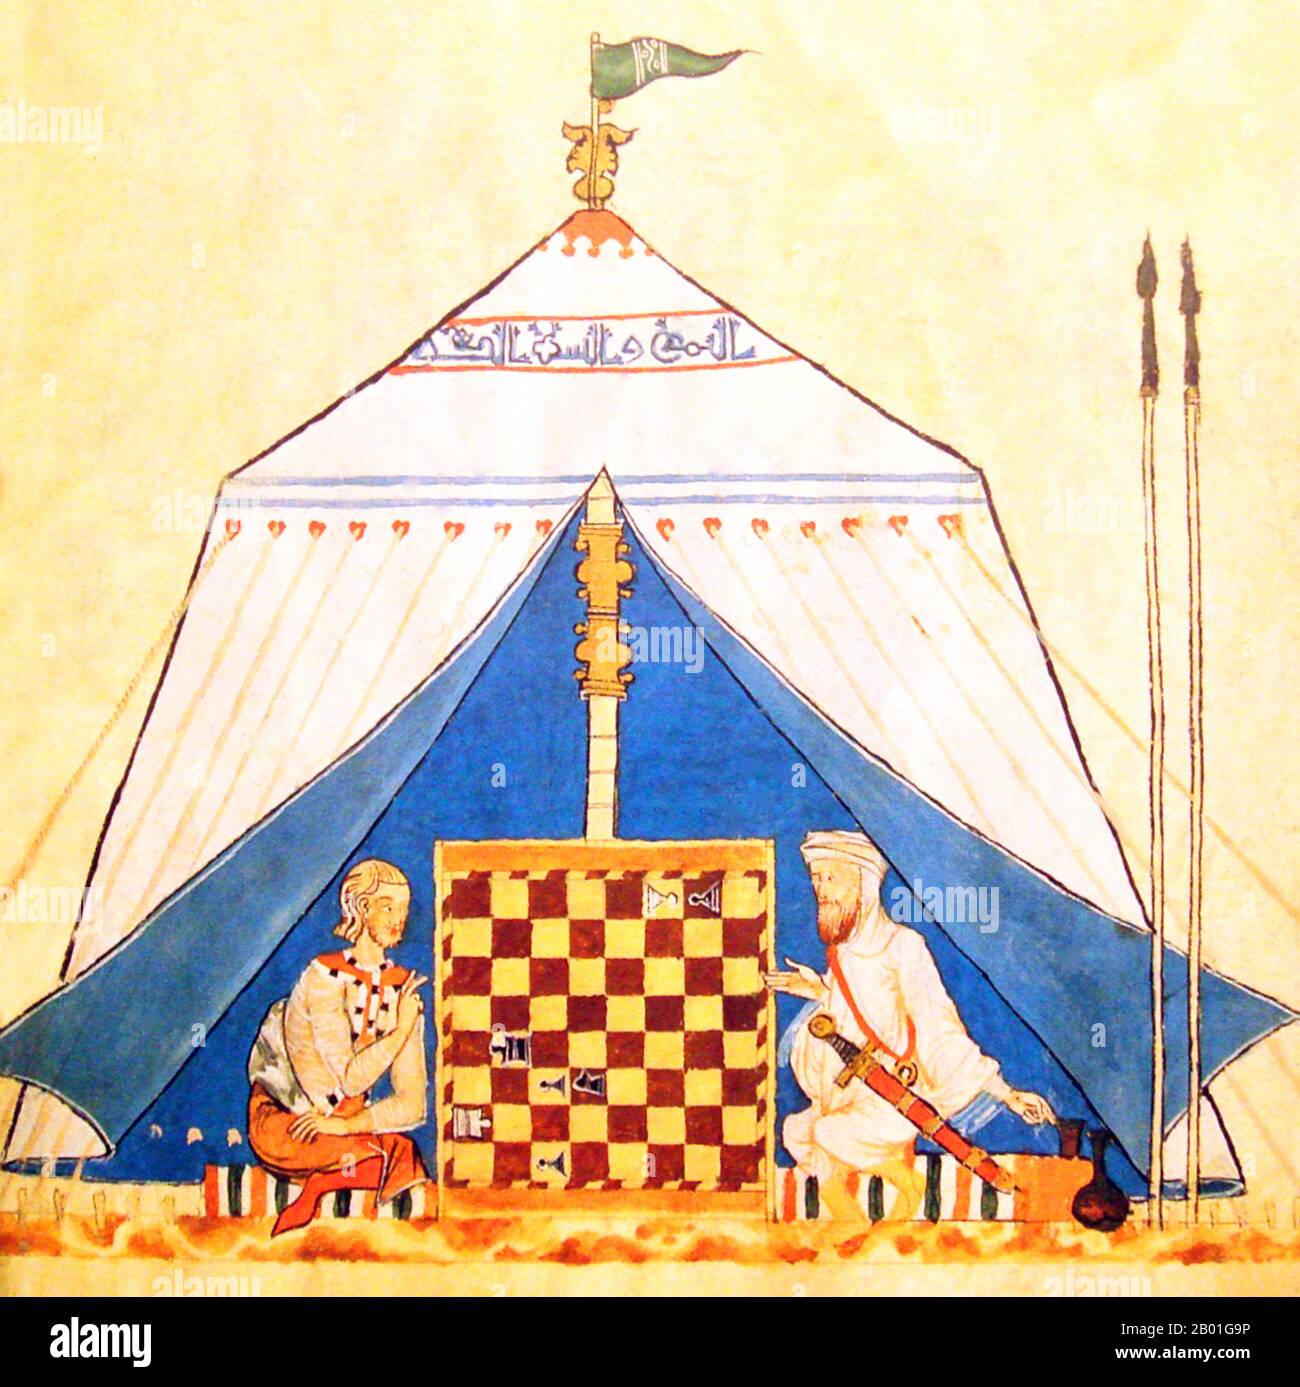 Spain/Al-Andalus: A Christian and a Muslim playing chess, from the 'Book of Games, Dice and Tables', Alfonso X of Castile (r. 1252-1284),c. 1251-1283.  Al-Andalus was the Arabic name given to a nation and territorial region also commonly referred to as Moorish Iberia. The name describes parts of the Iberian Peninsula and Septimania governed by Muslims (often given the generic name of Moors), at various times in the period between 711 and 1492, although the territorial boundaries underwent constant changes due to wars with the Christian Kingdoms. Stock Photo